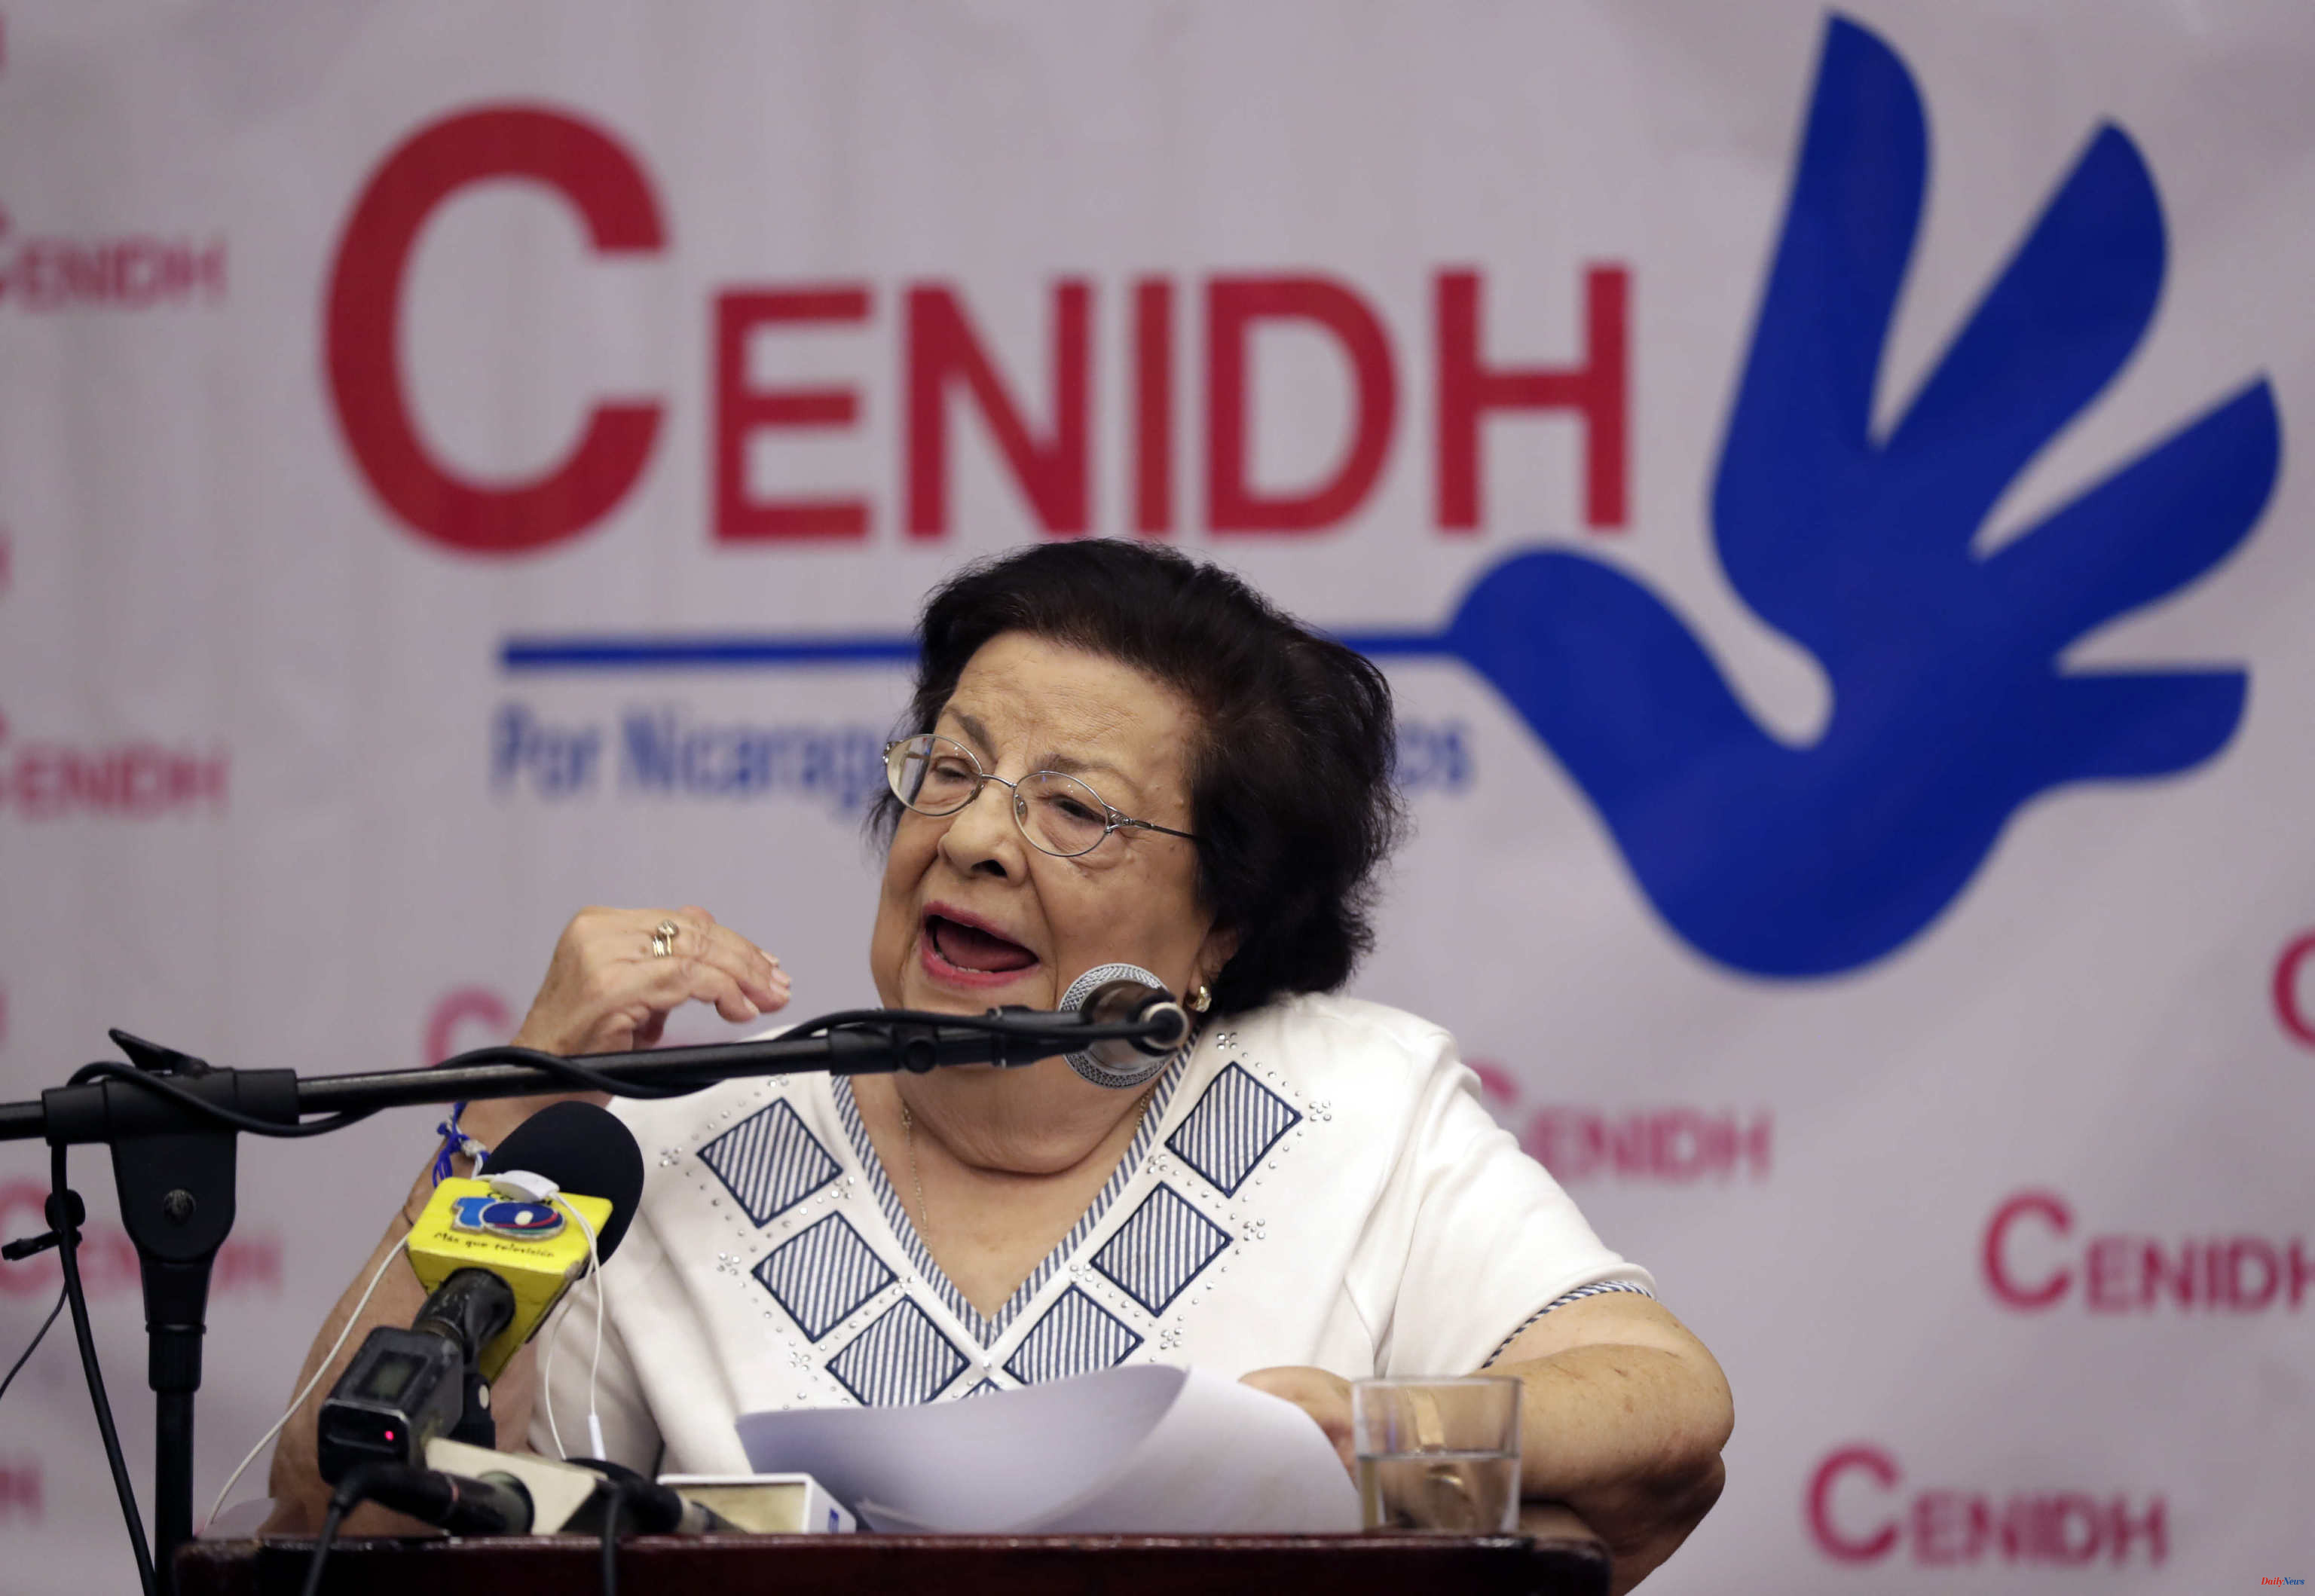 Latin America Daniel Ortega closes the Association of Women with Cancer and Cuba prohibits the 8-M march